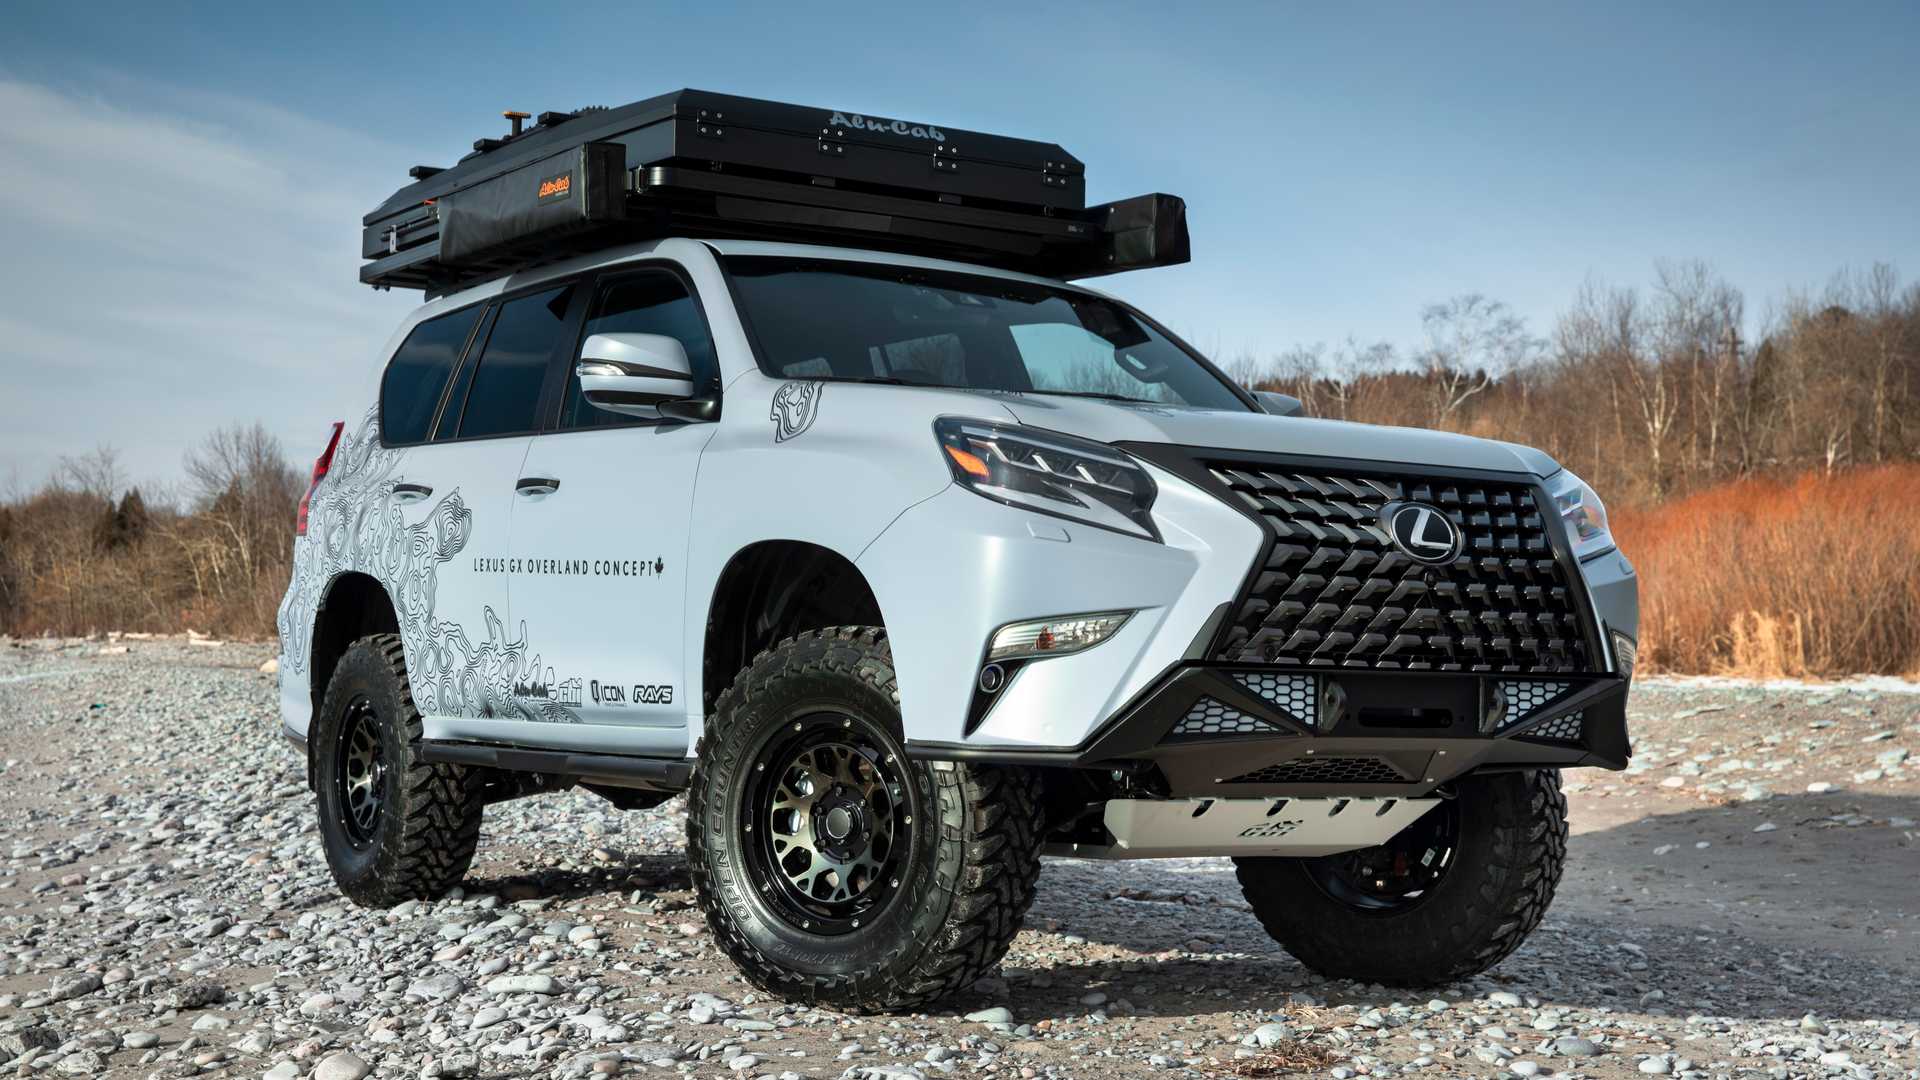 2020 Lexus 460 GX Overland luxury camping concept parked in gravel